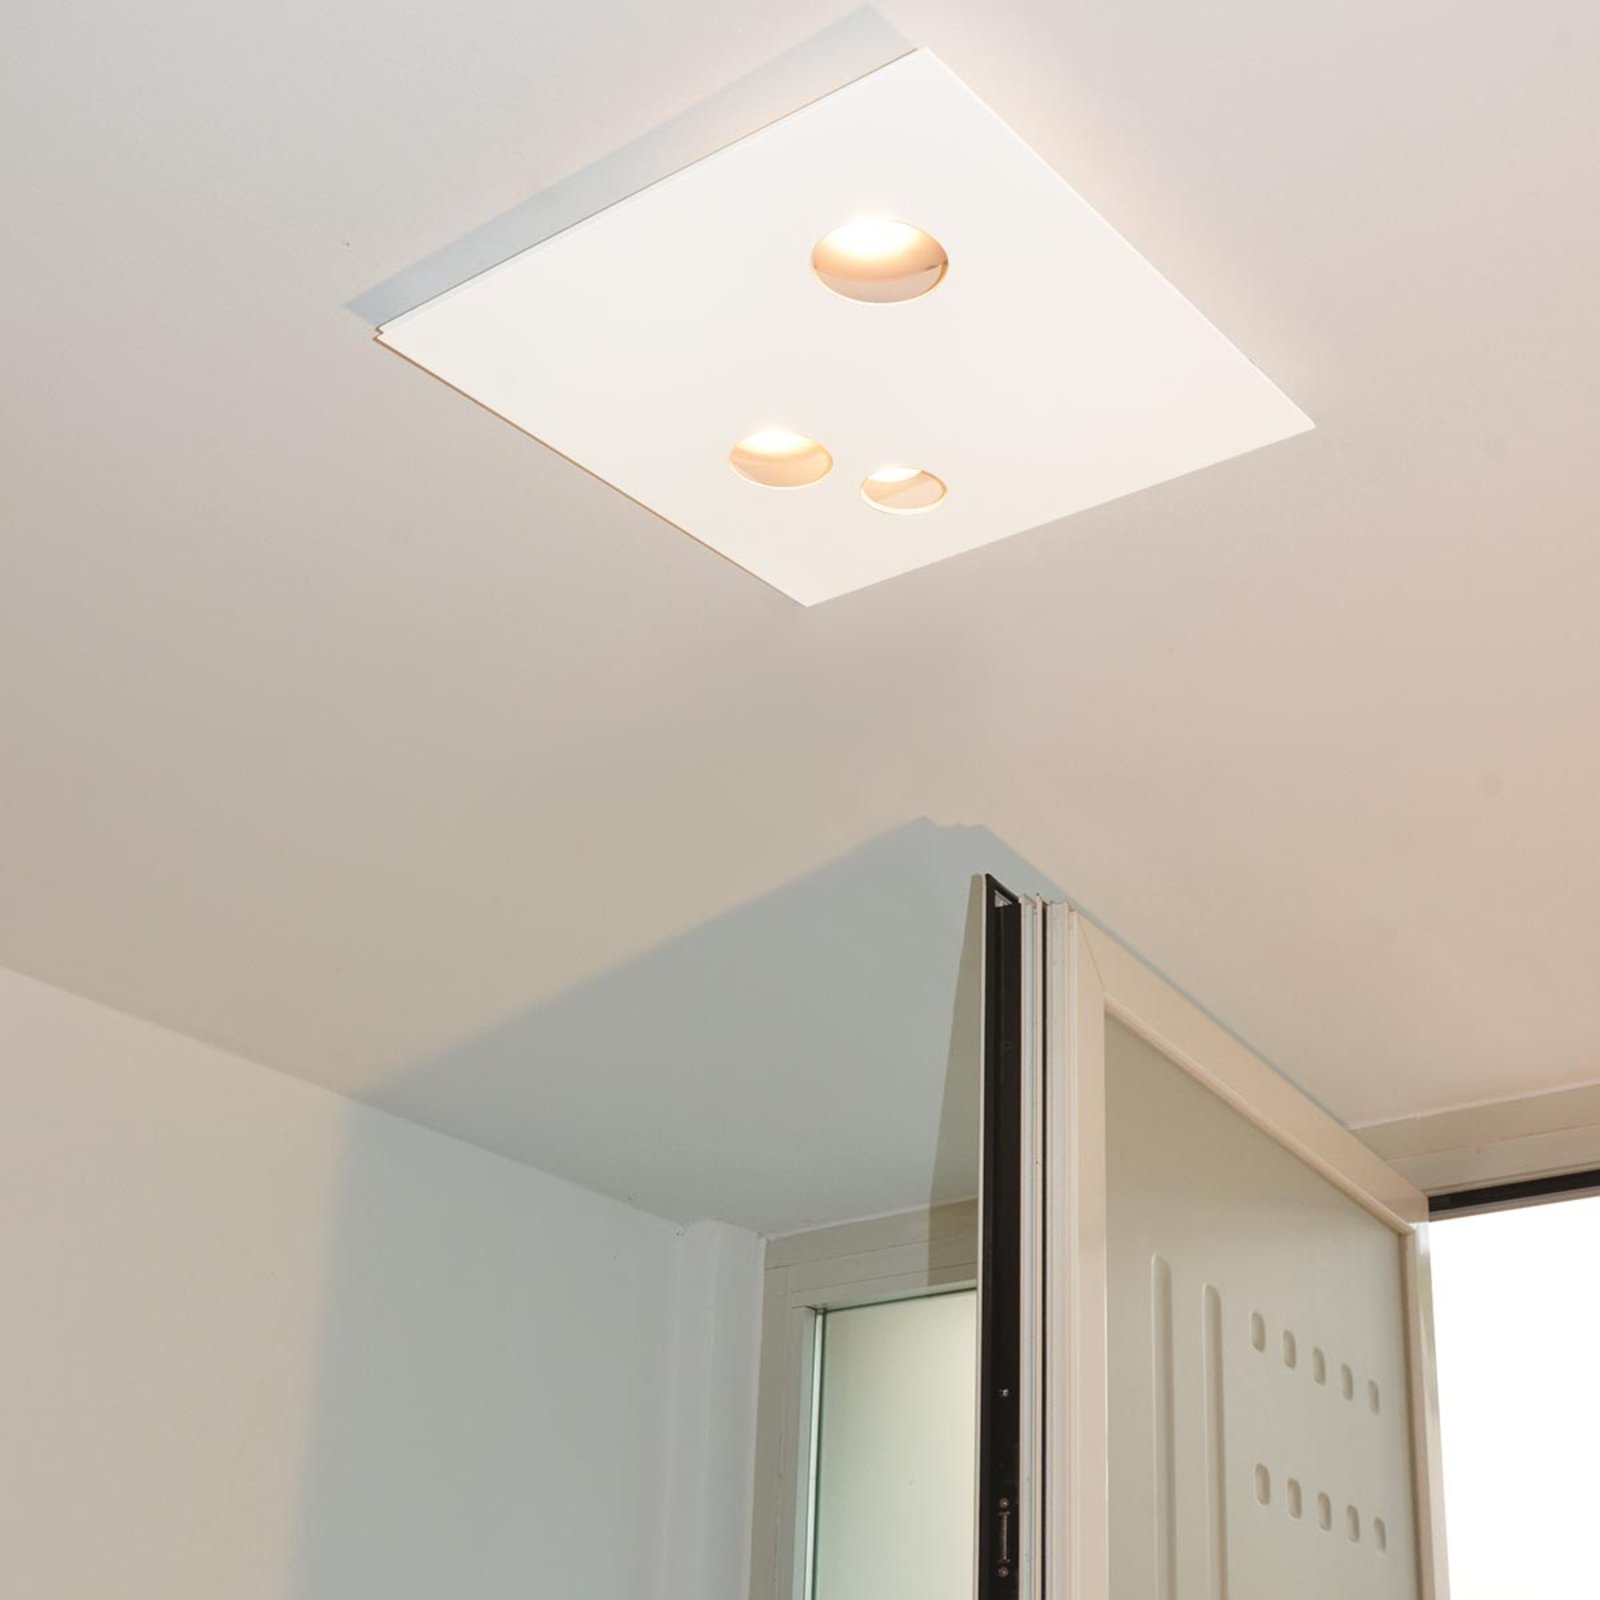 Knikerboker Des.agn LED ceiling lamp, round holes